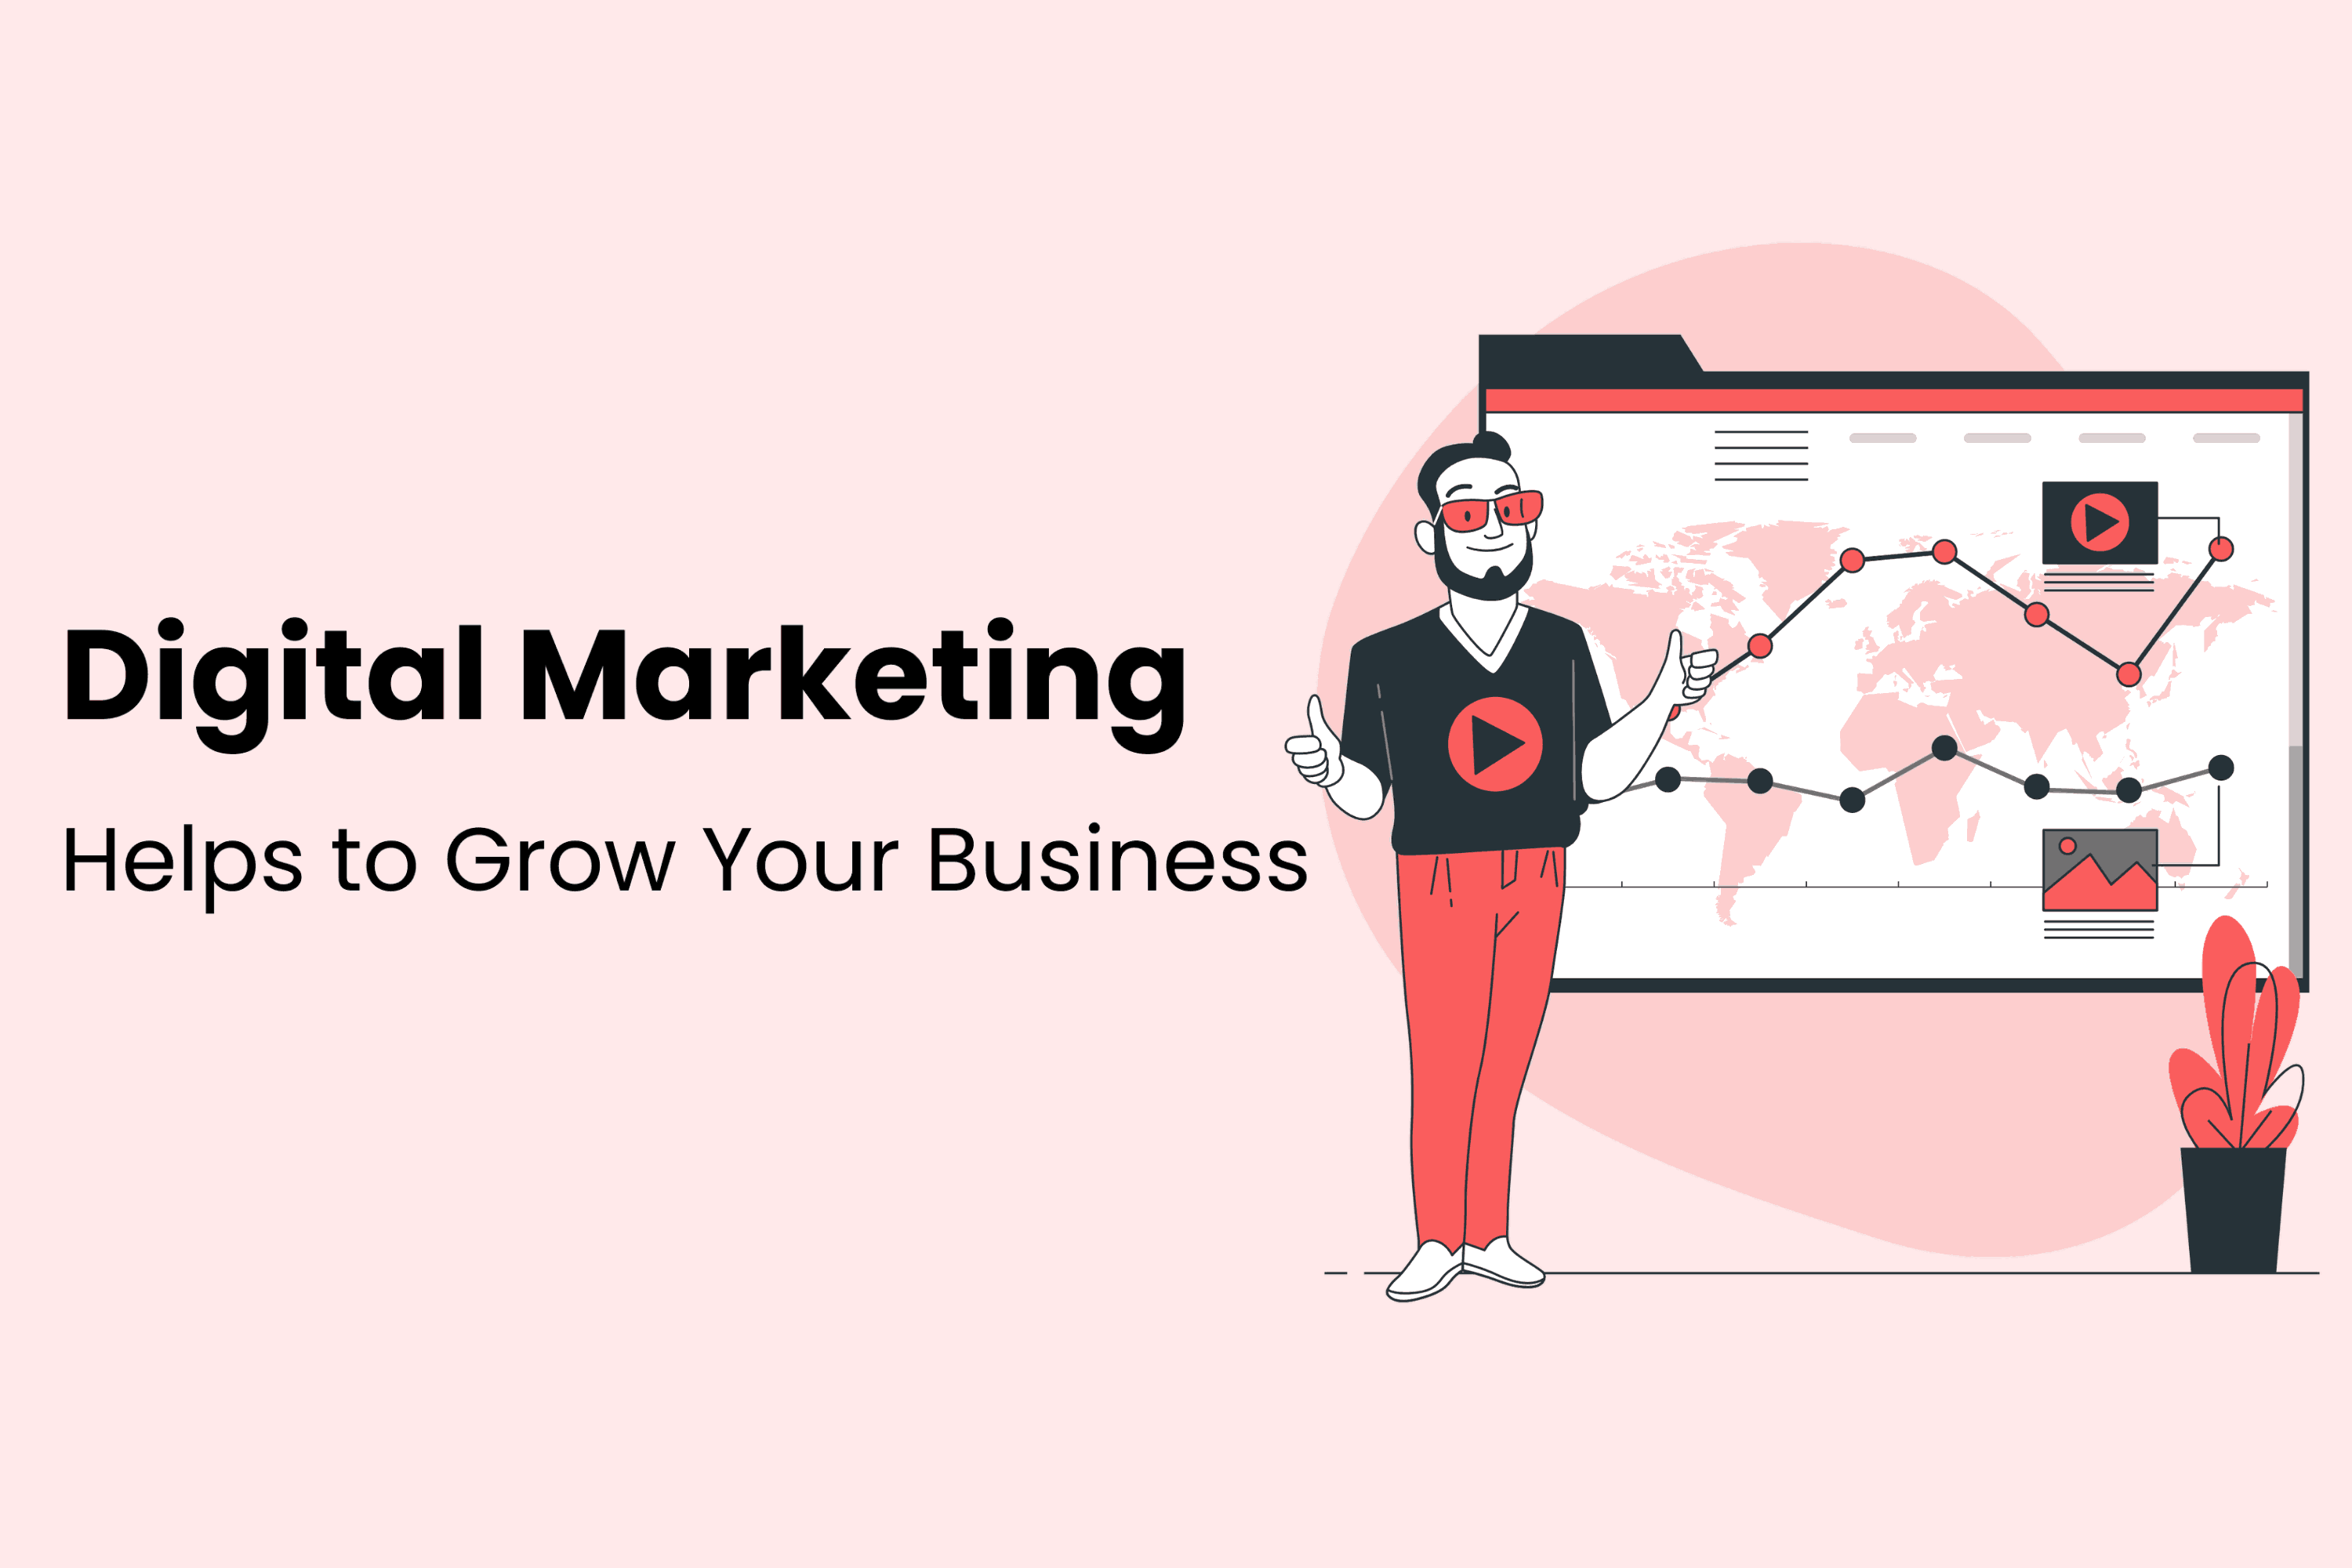 Evolution of Digital Marketing and How it Helps to Grow Your Business